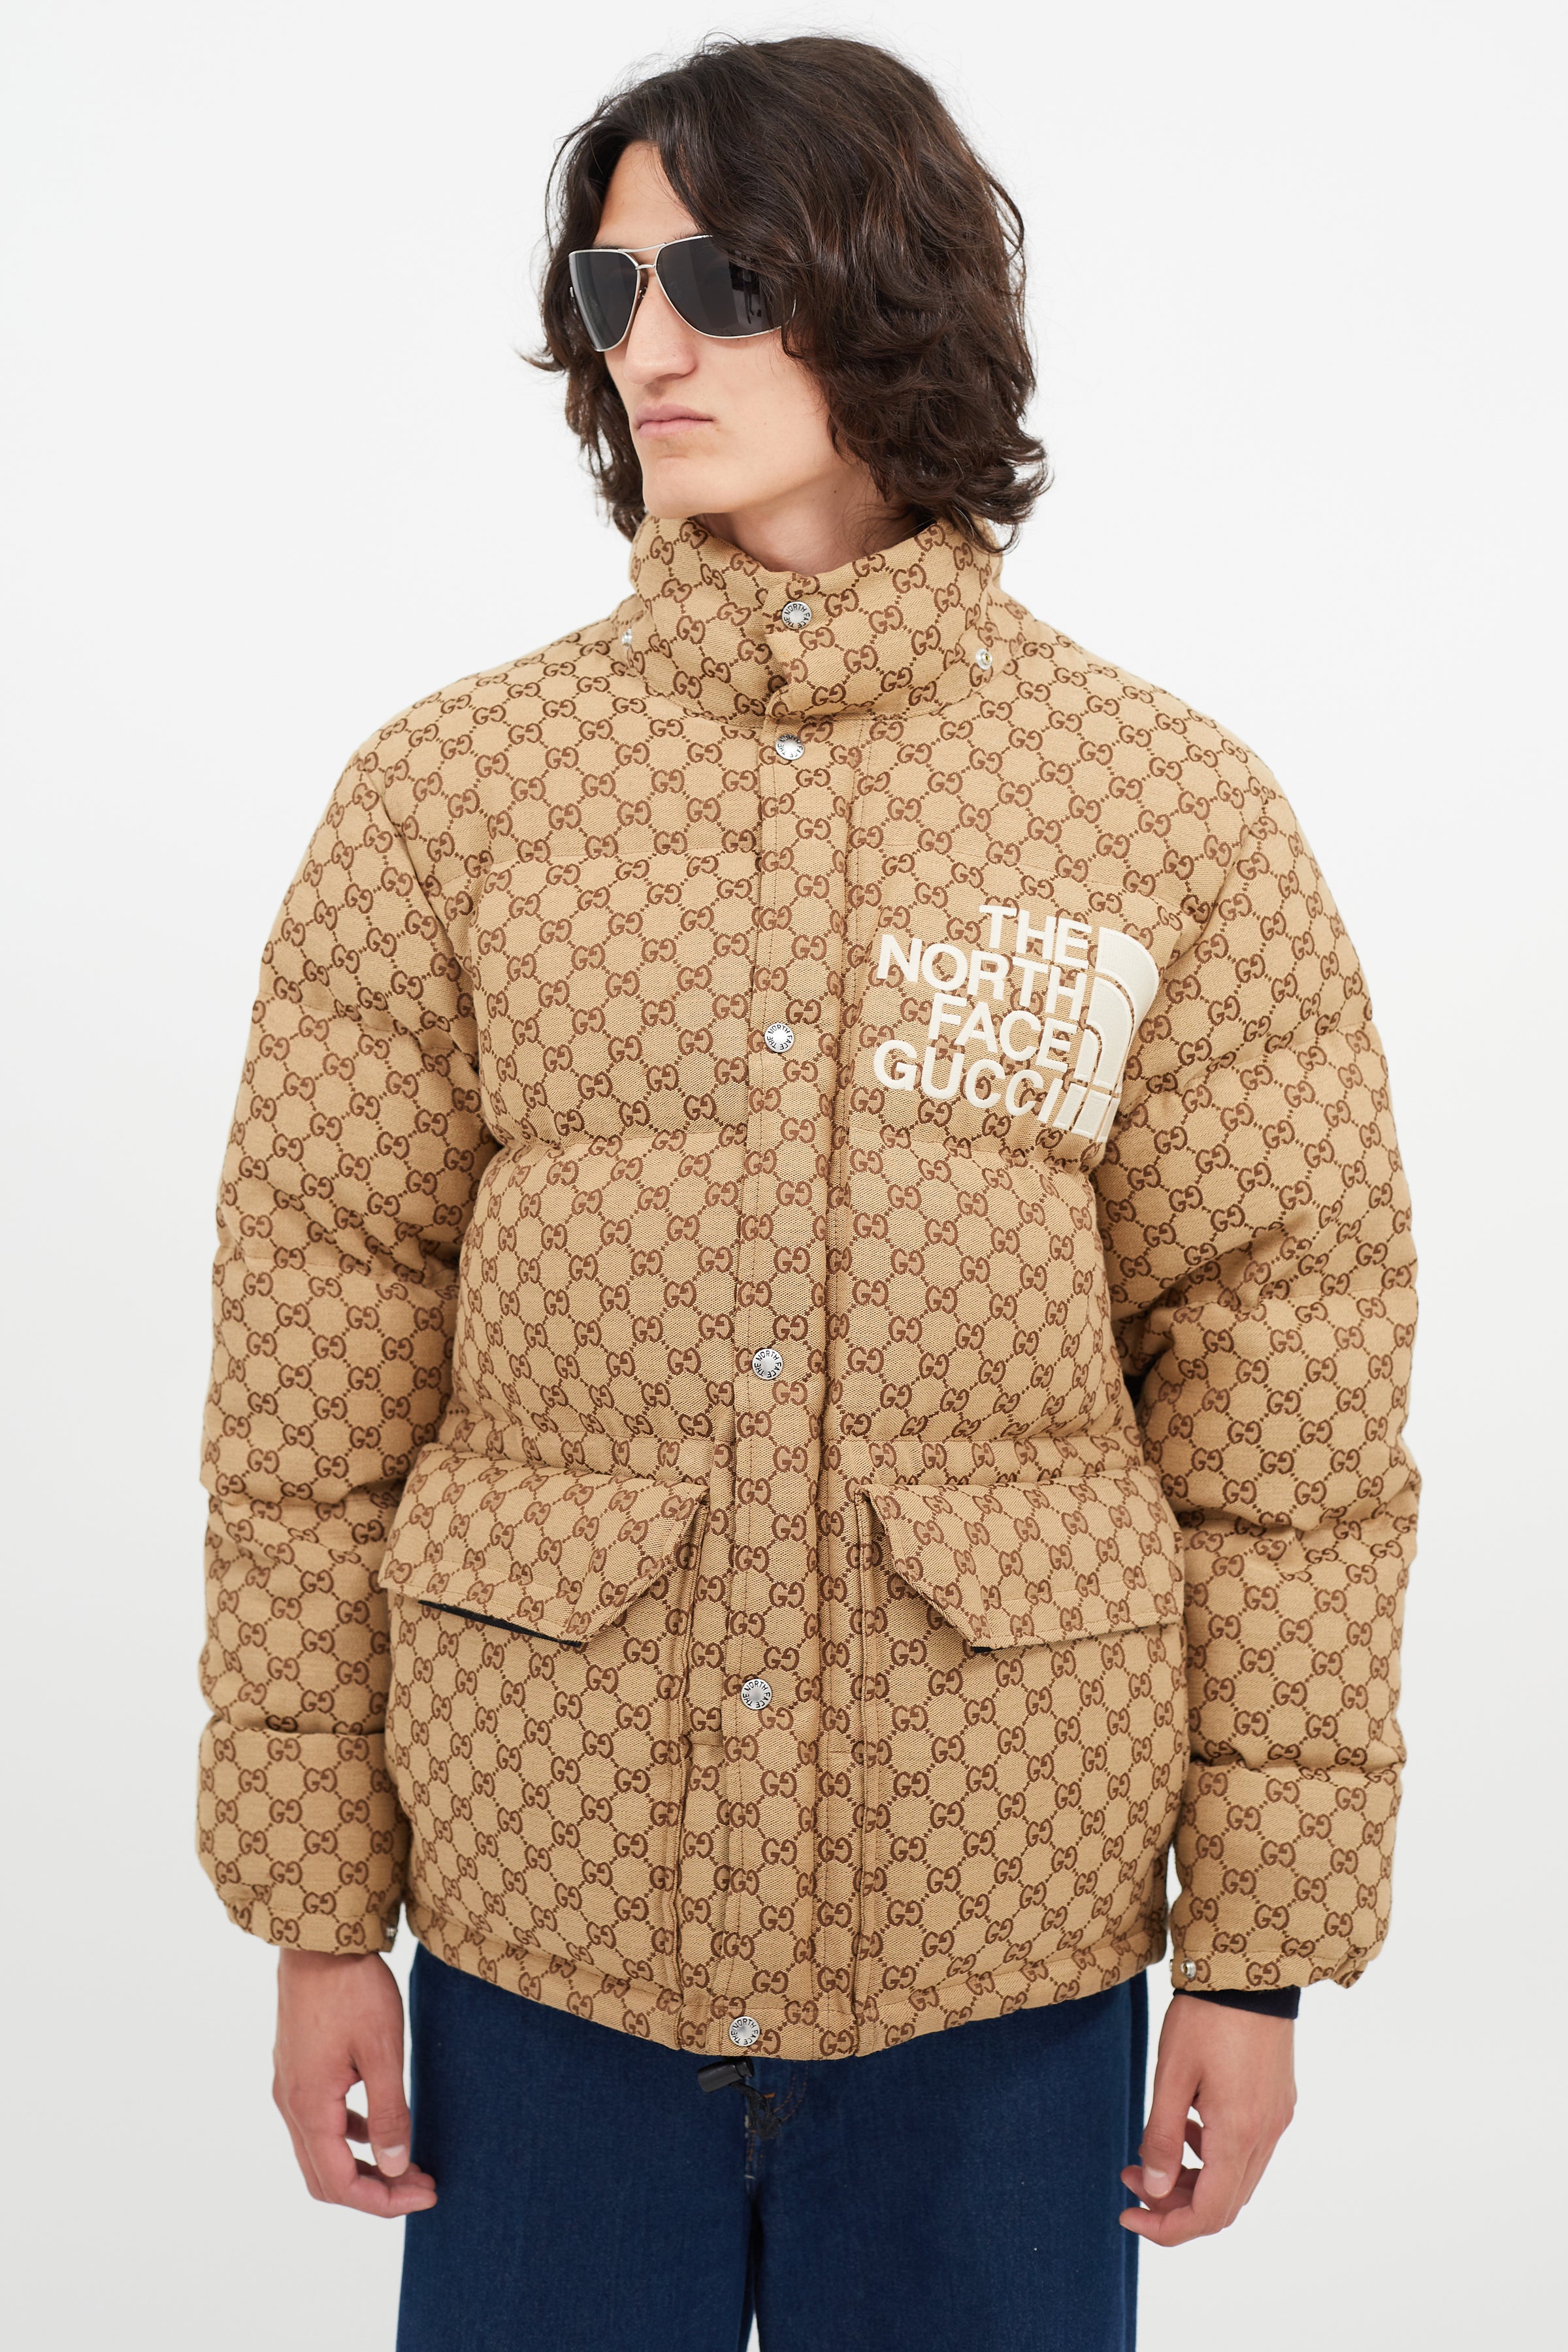 Gucci X North Face Gucci Puffer Jacket In Medium Large And XL